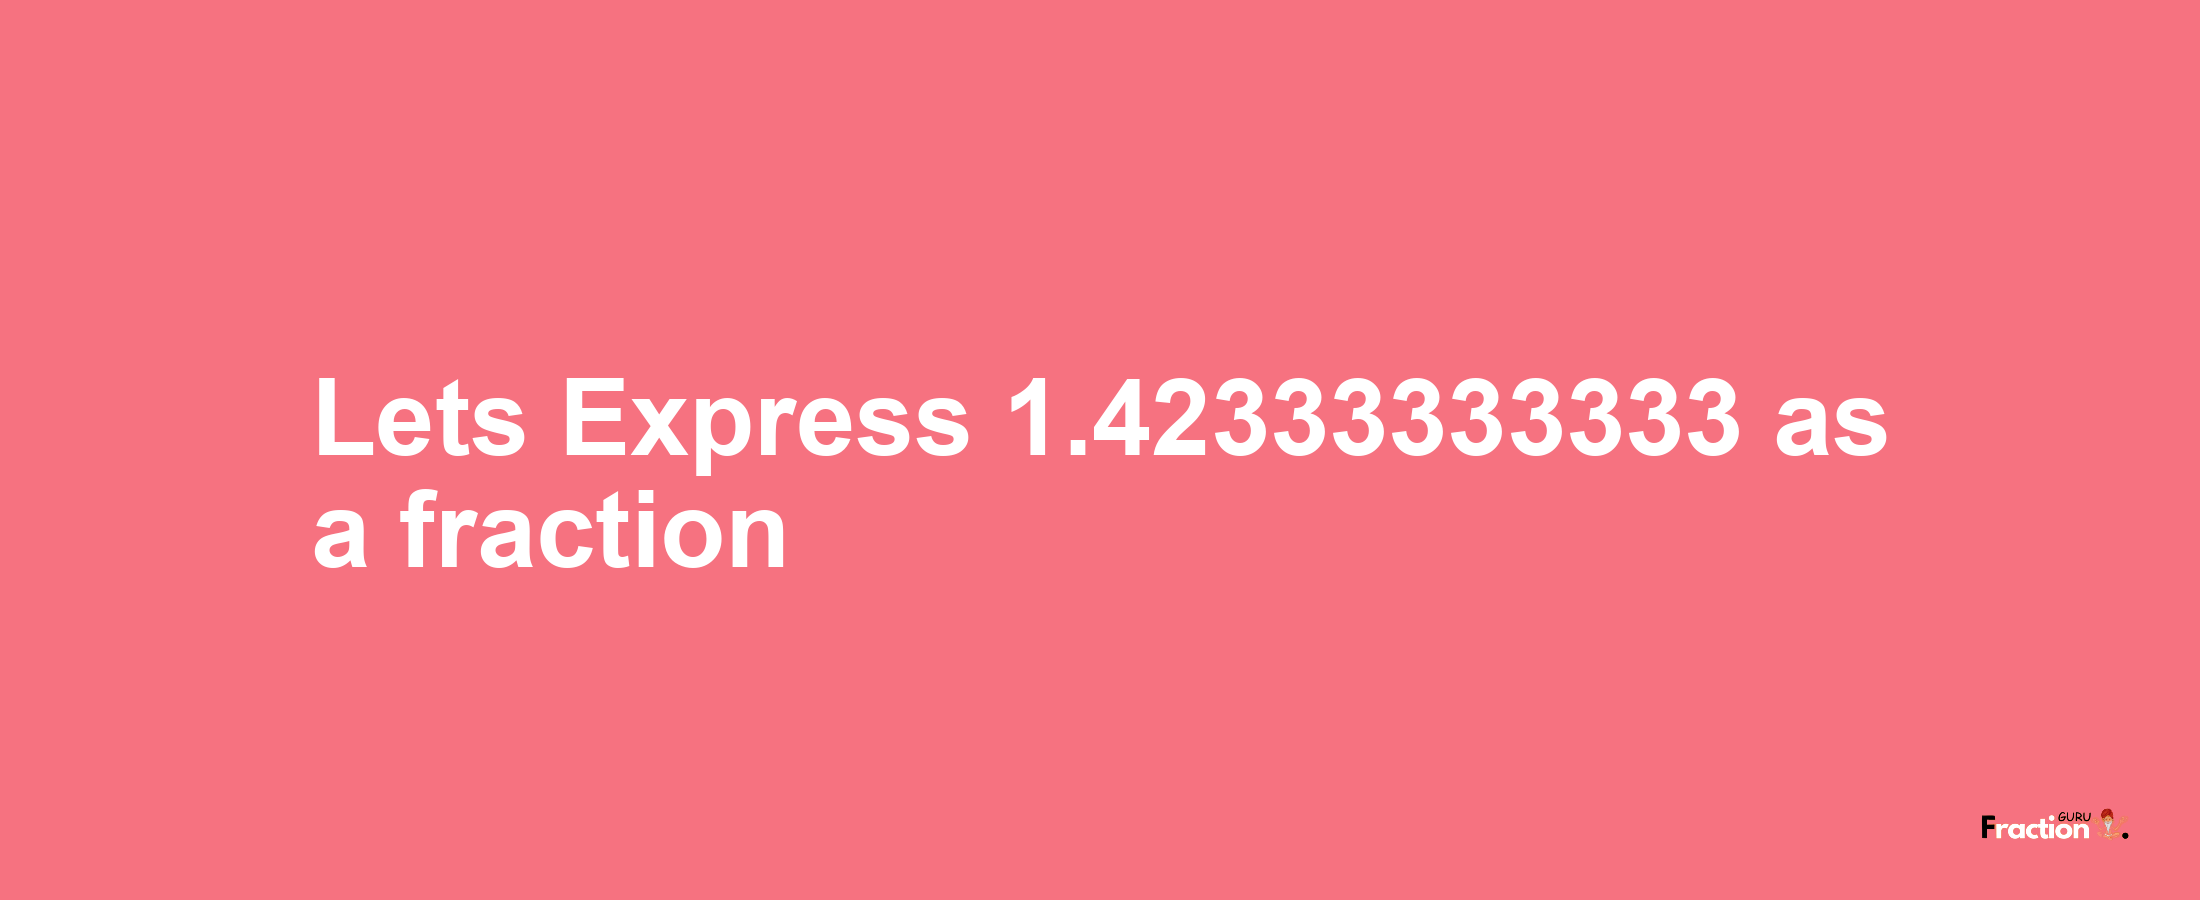 Lets Express 1.42333333333 as afraction